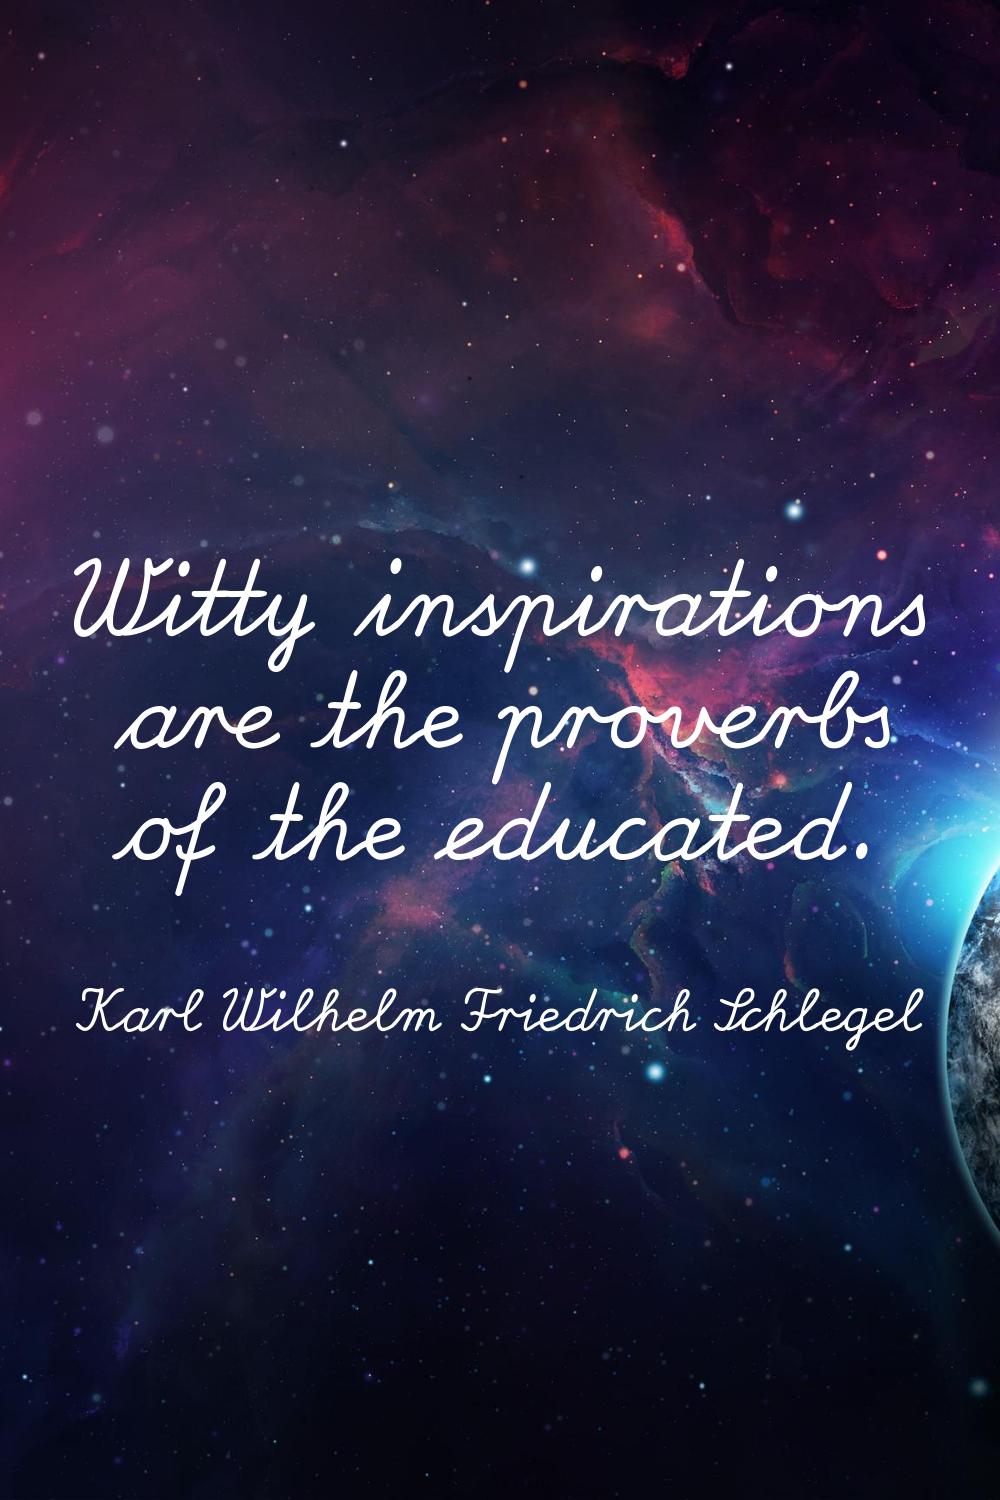 Witty inspirations are the proverbs of the educated.